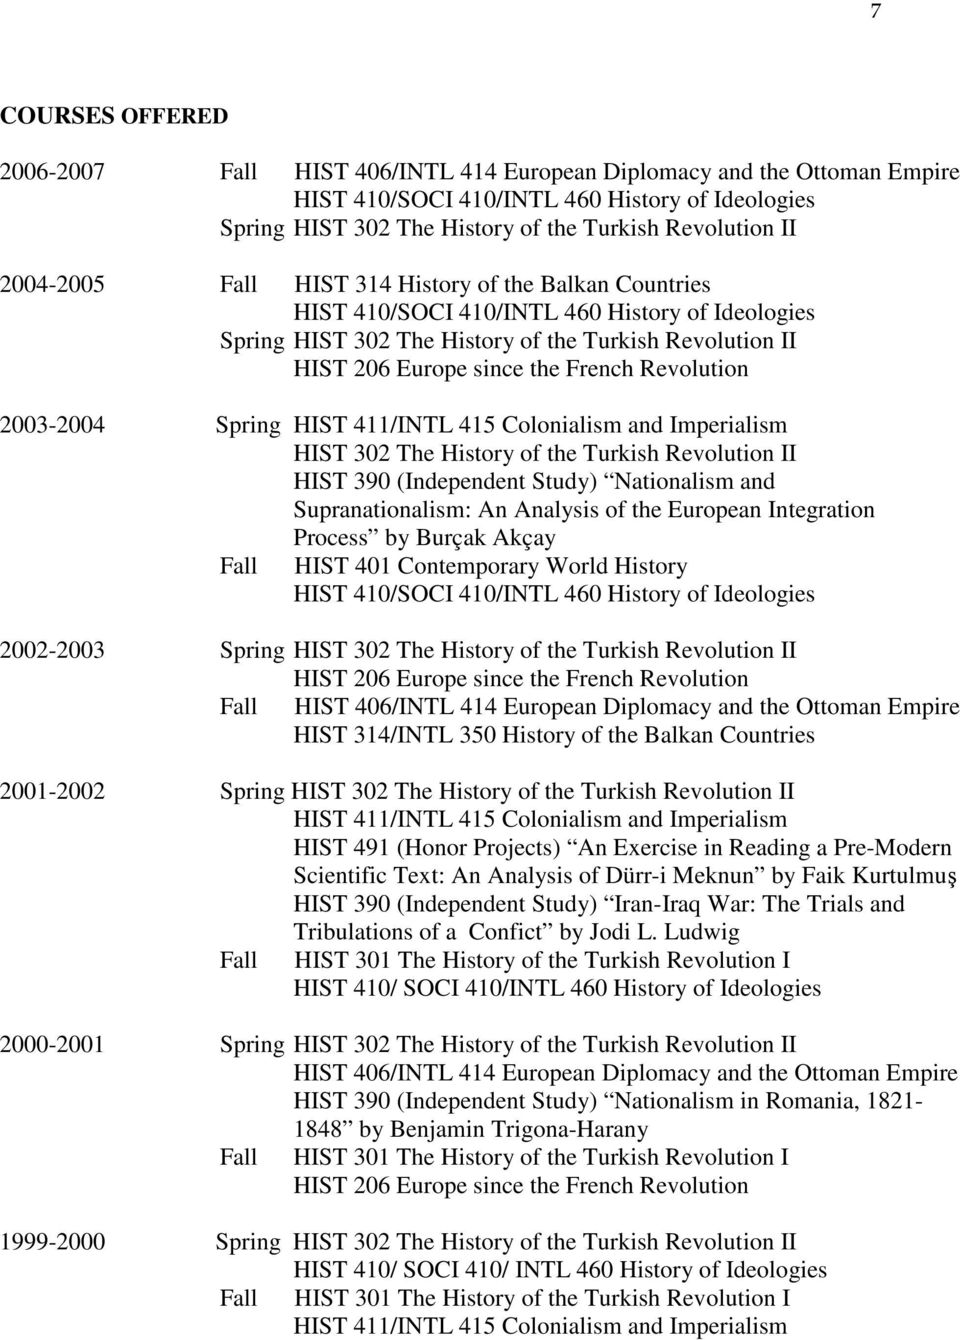 Colonialism and Imperialism HIST 302 The History of the Turkish Revolution II HIST 390 (Independent Study) Nationalism and Supranationalism: An Analysis of the European Integration Process by Burçak